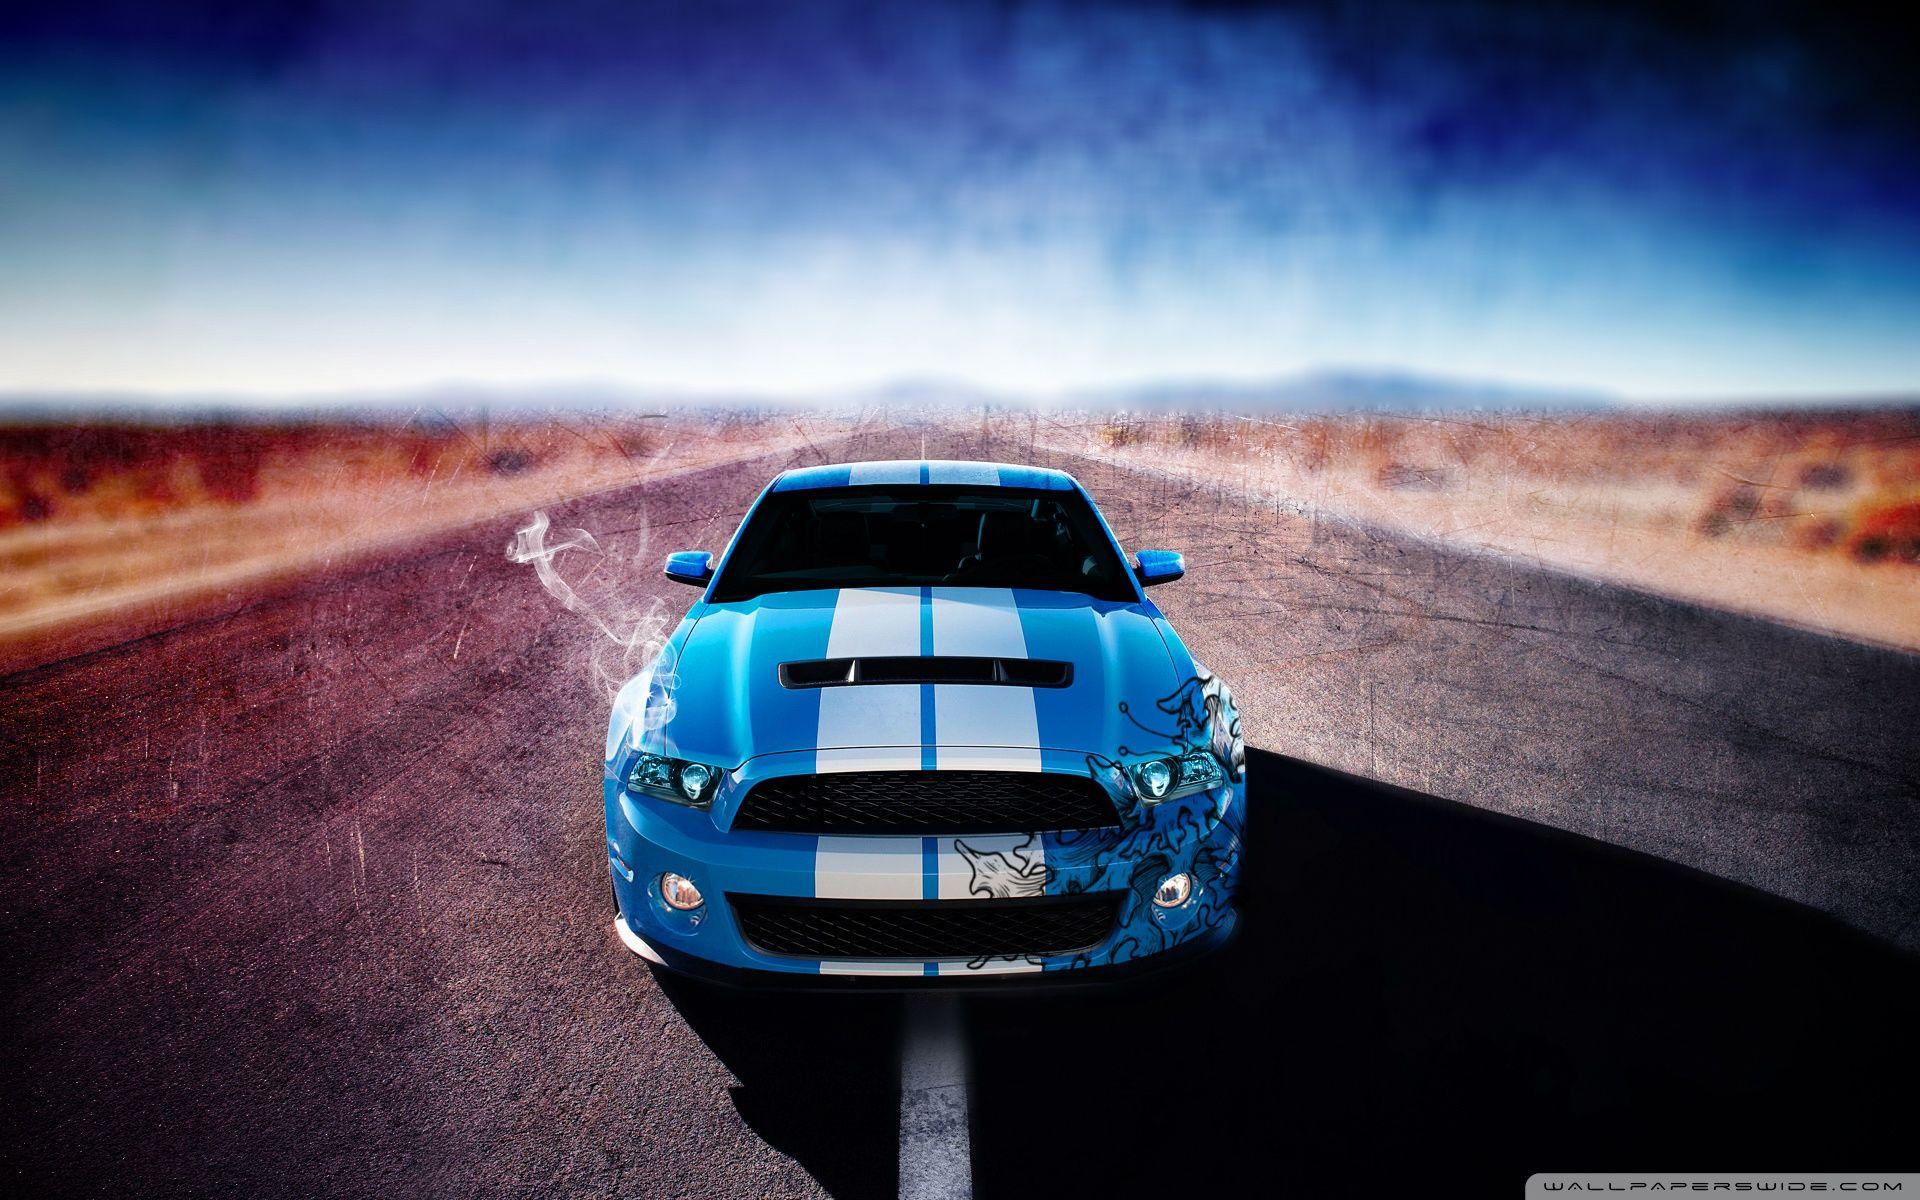 Ford Mustang Shelby GT500 ❤ 4K HD Desktop Wallpapers for 4K